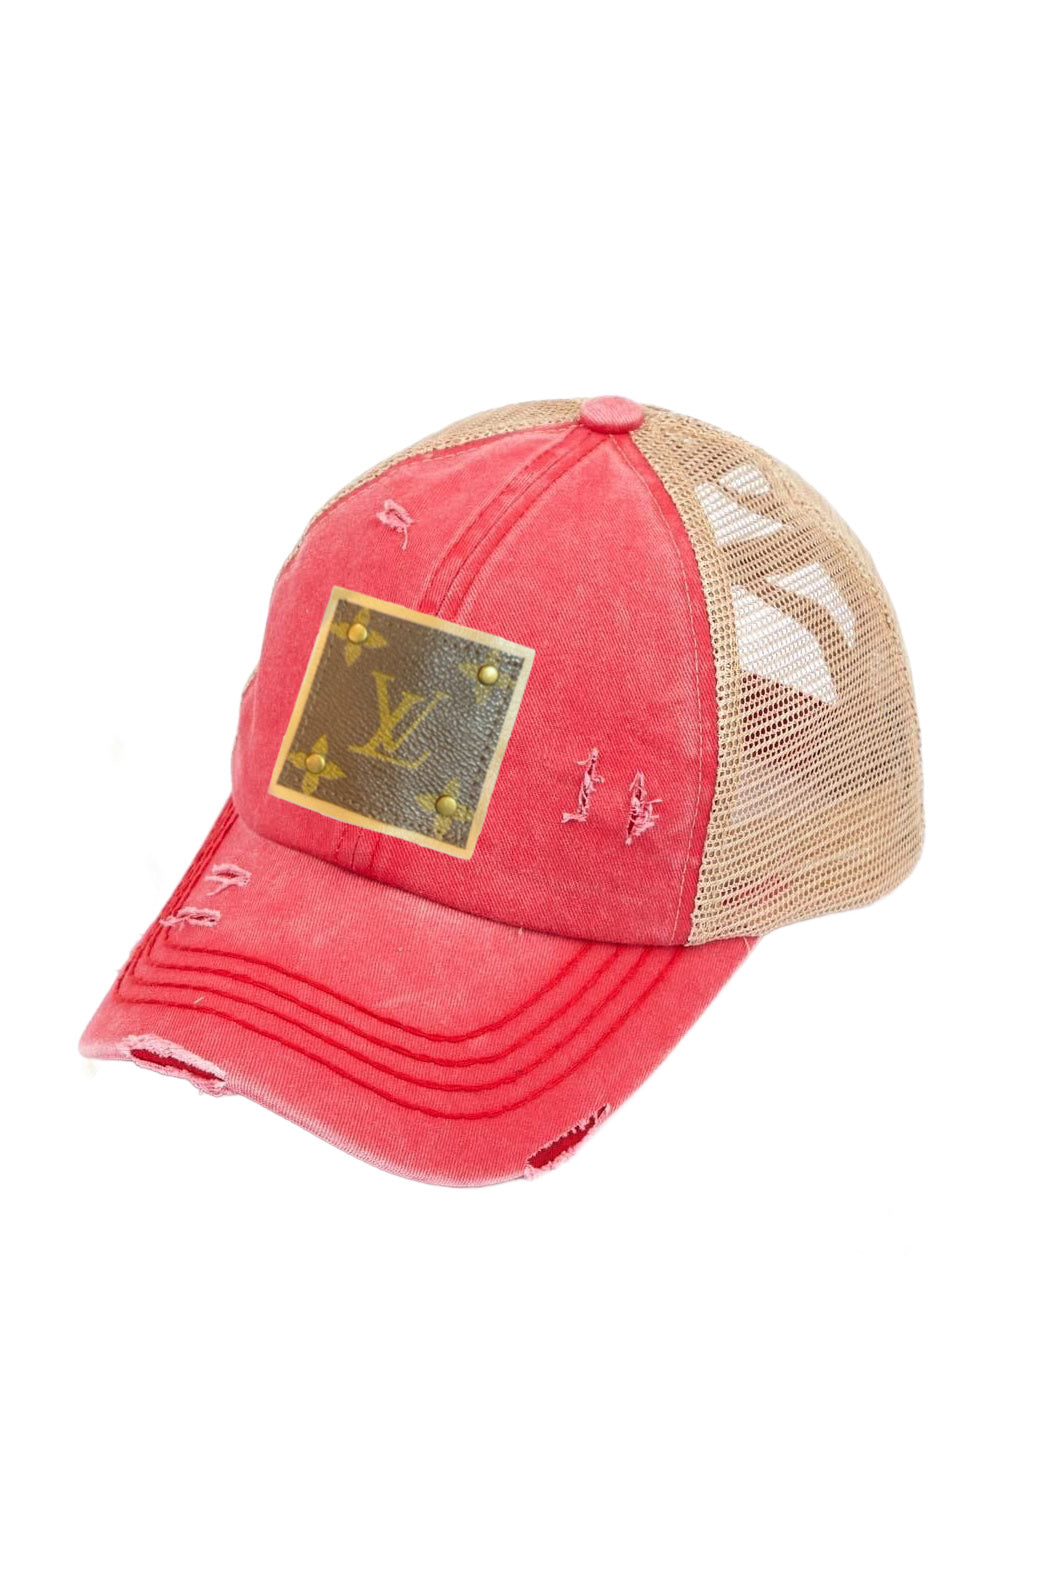 Upcycled Distressed Trucker Cap -  available in 15 colors